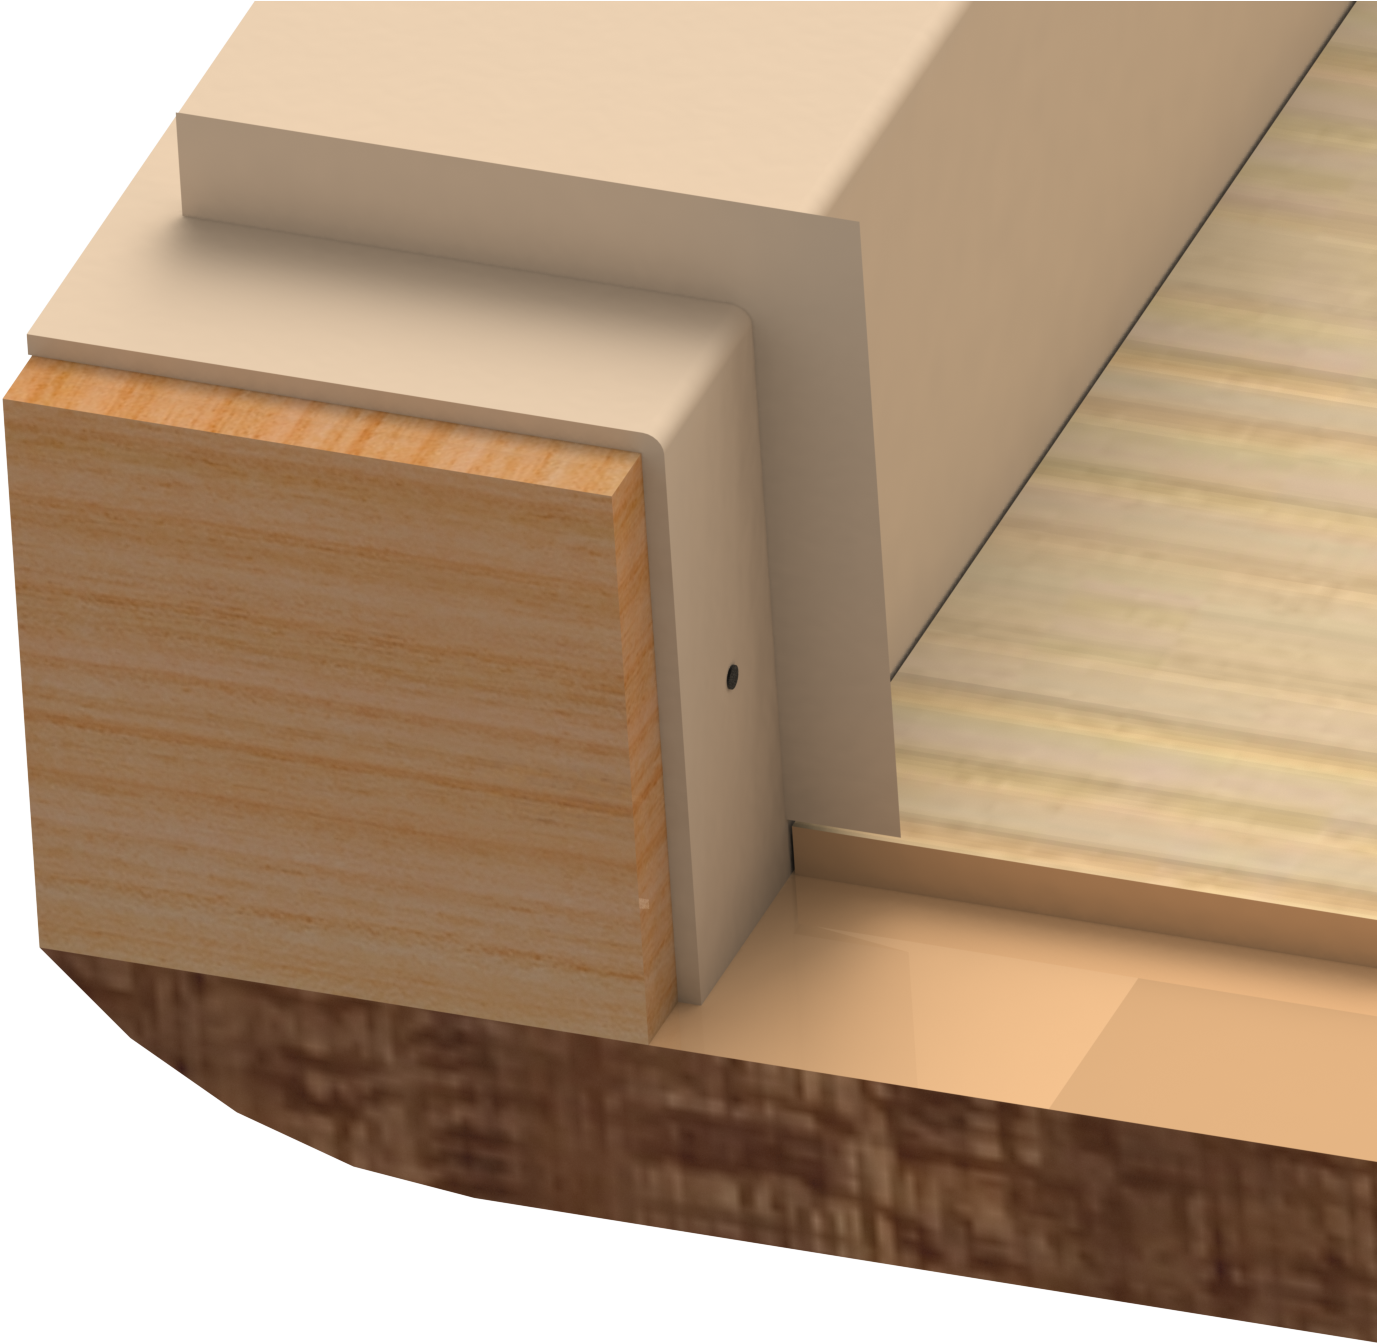 Our New Corner Design Uses A Plastic Insert To Hide - Plywood (2144x1423), Png Download